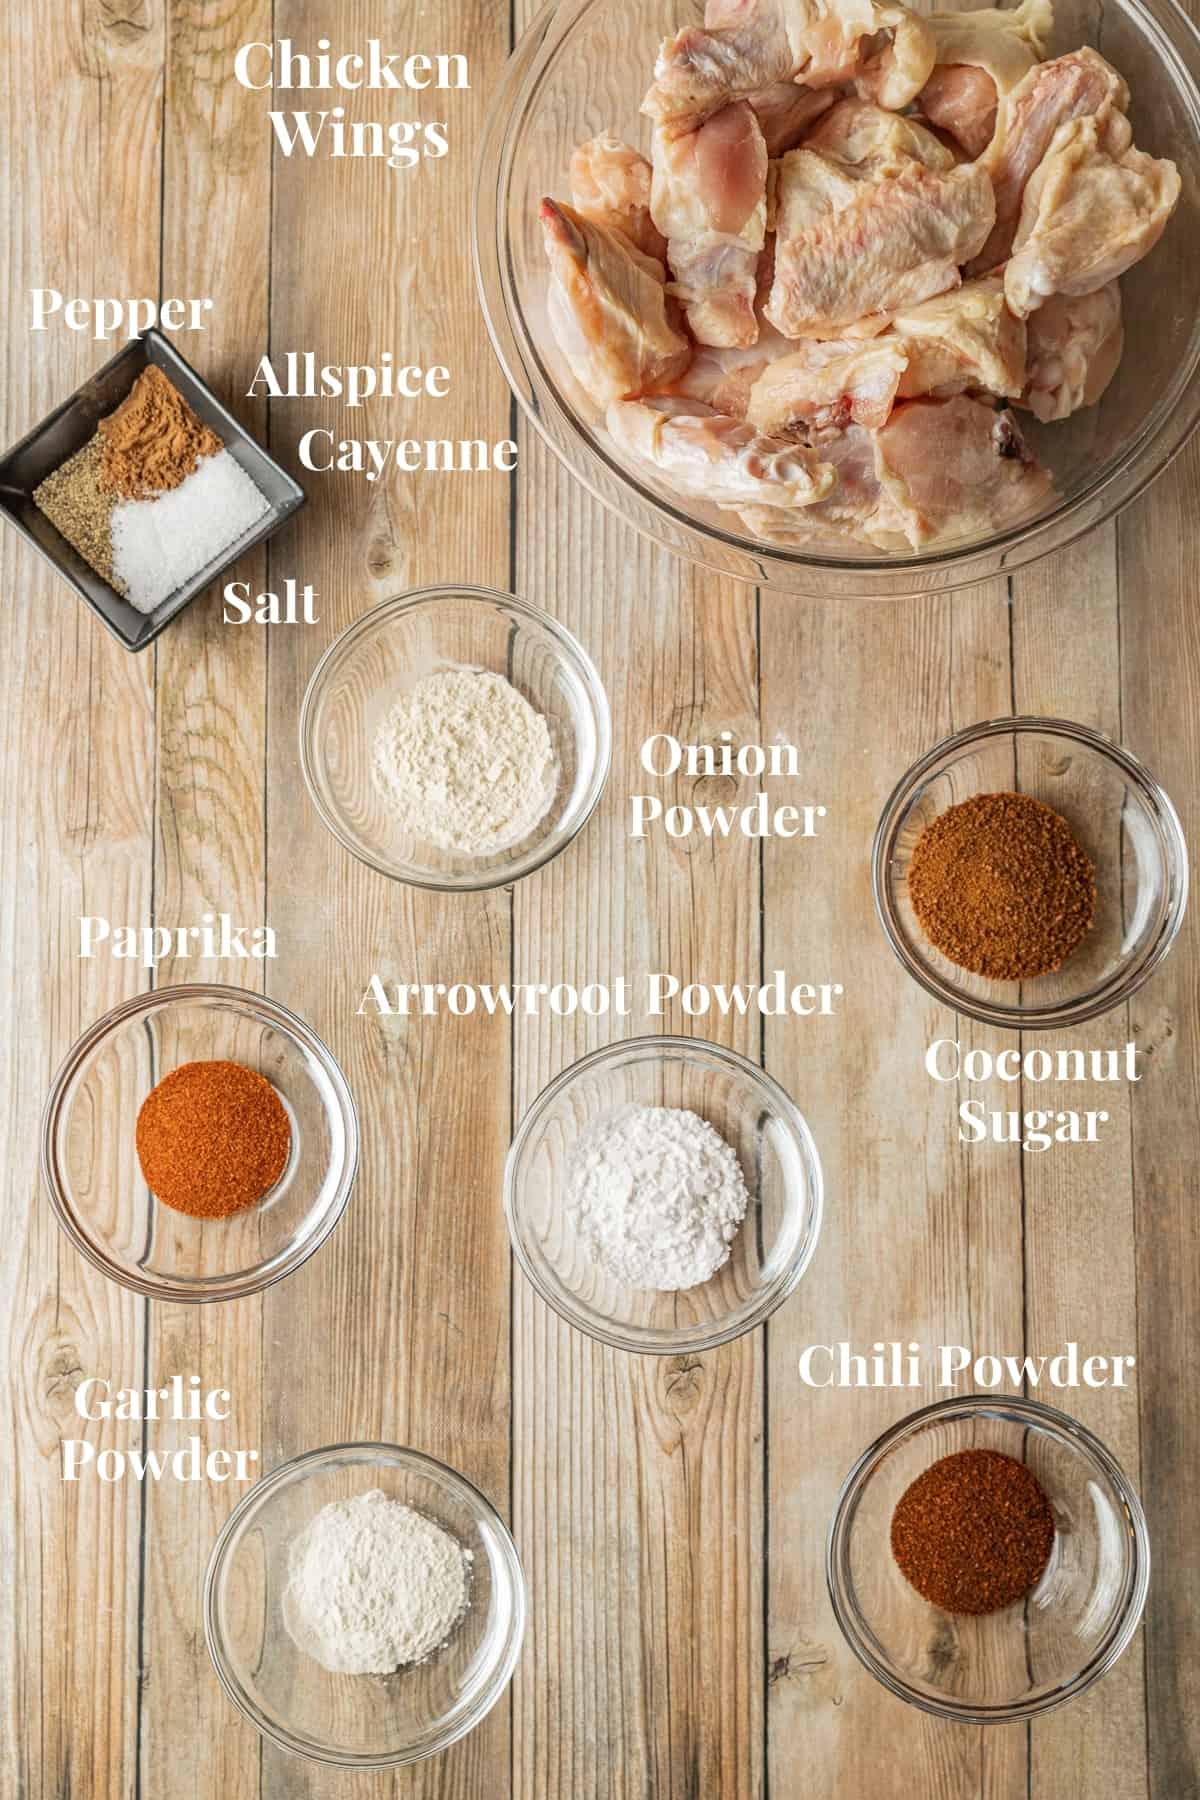 The ingredients needed for dry rub chicken wings in glass bowls on a wood background.